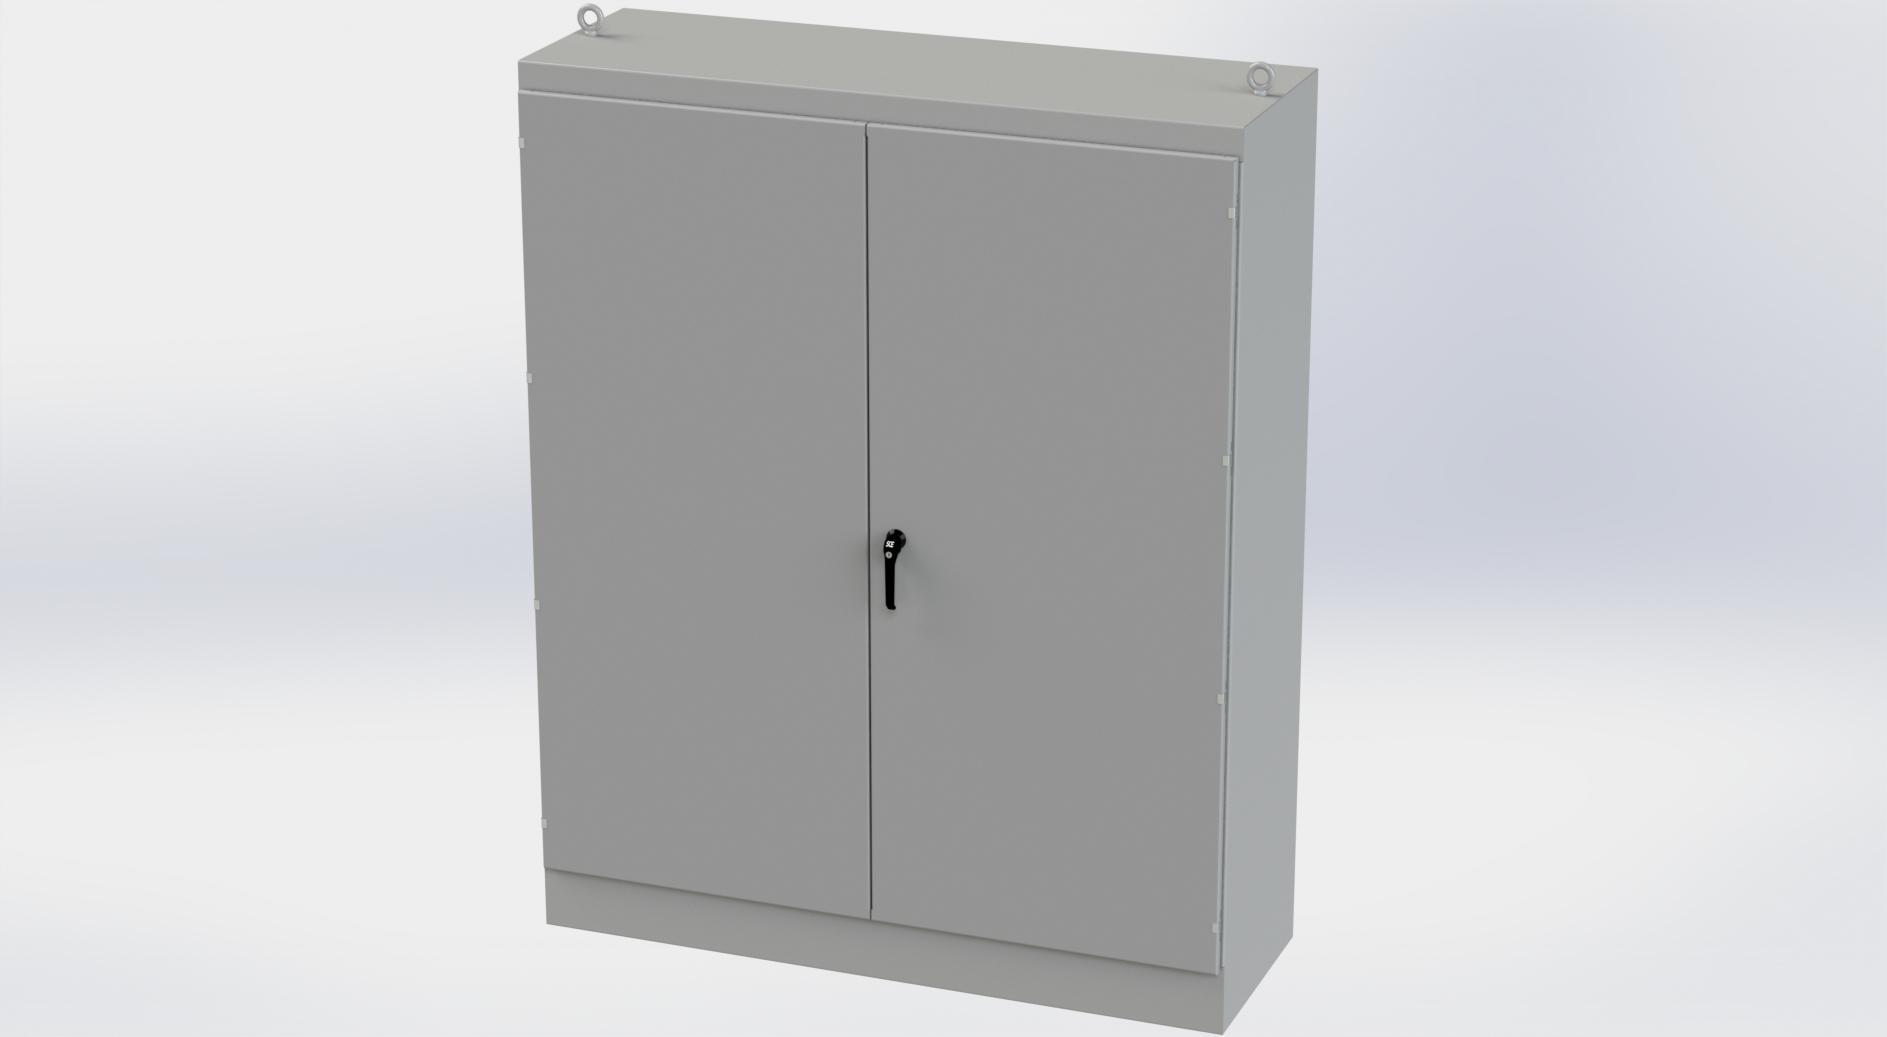 Saginaw Control SCE-907224FSD FSD Enclosure, Height:90.00", Width:72.00", Depth:24.00", ANSI-61 gray finish inside and out. Optional sub-panels are powder coated white.